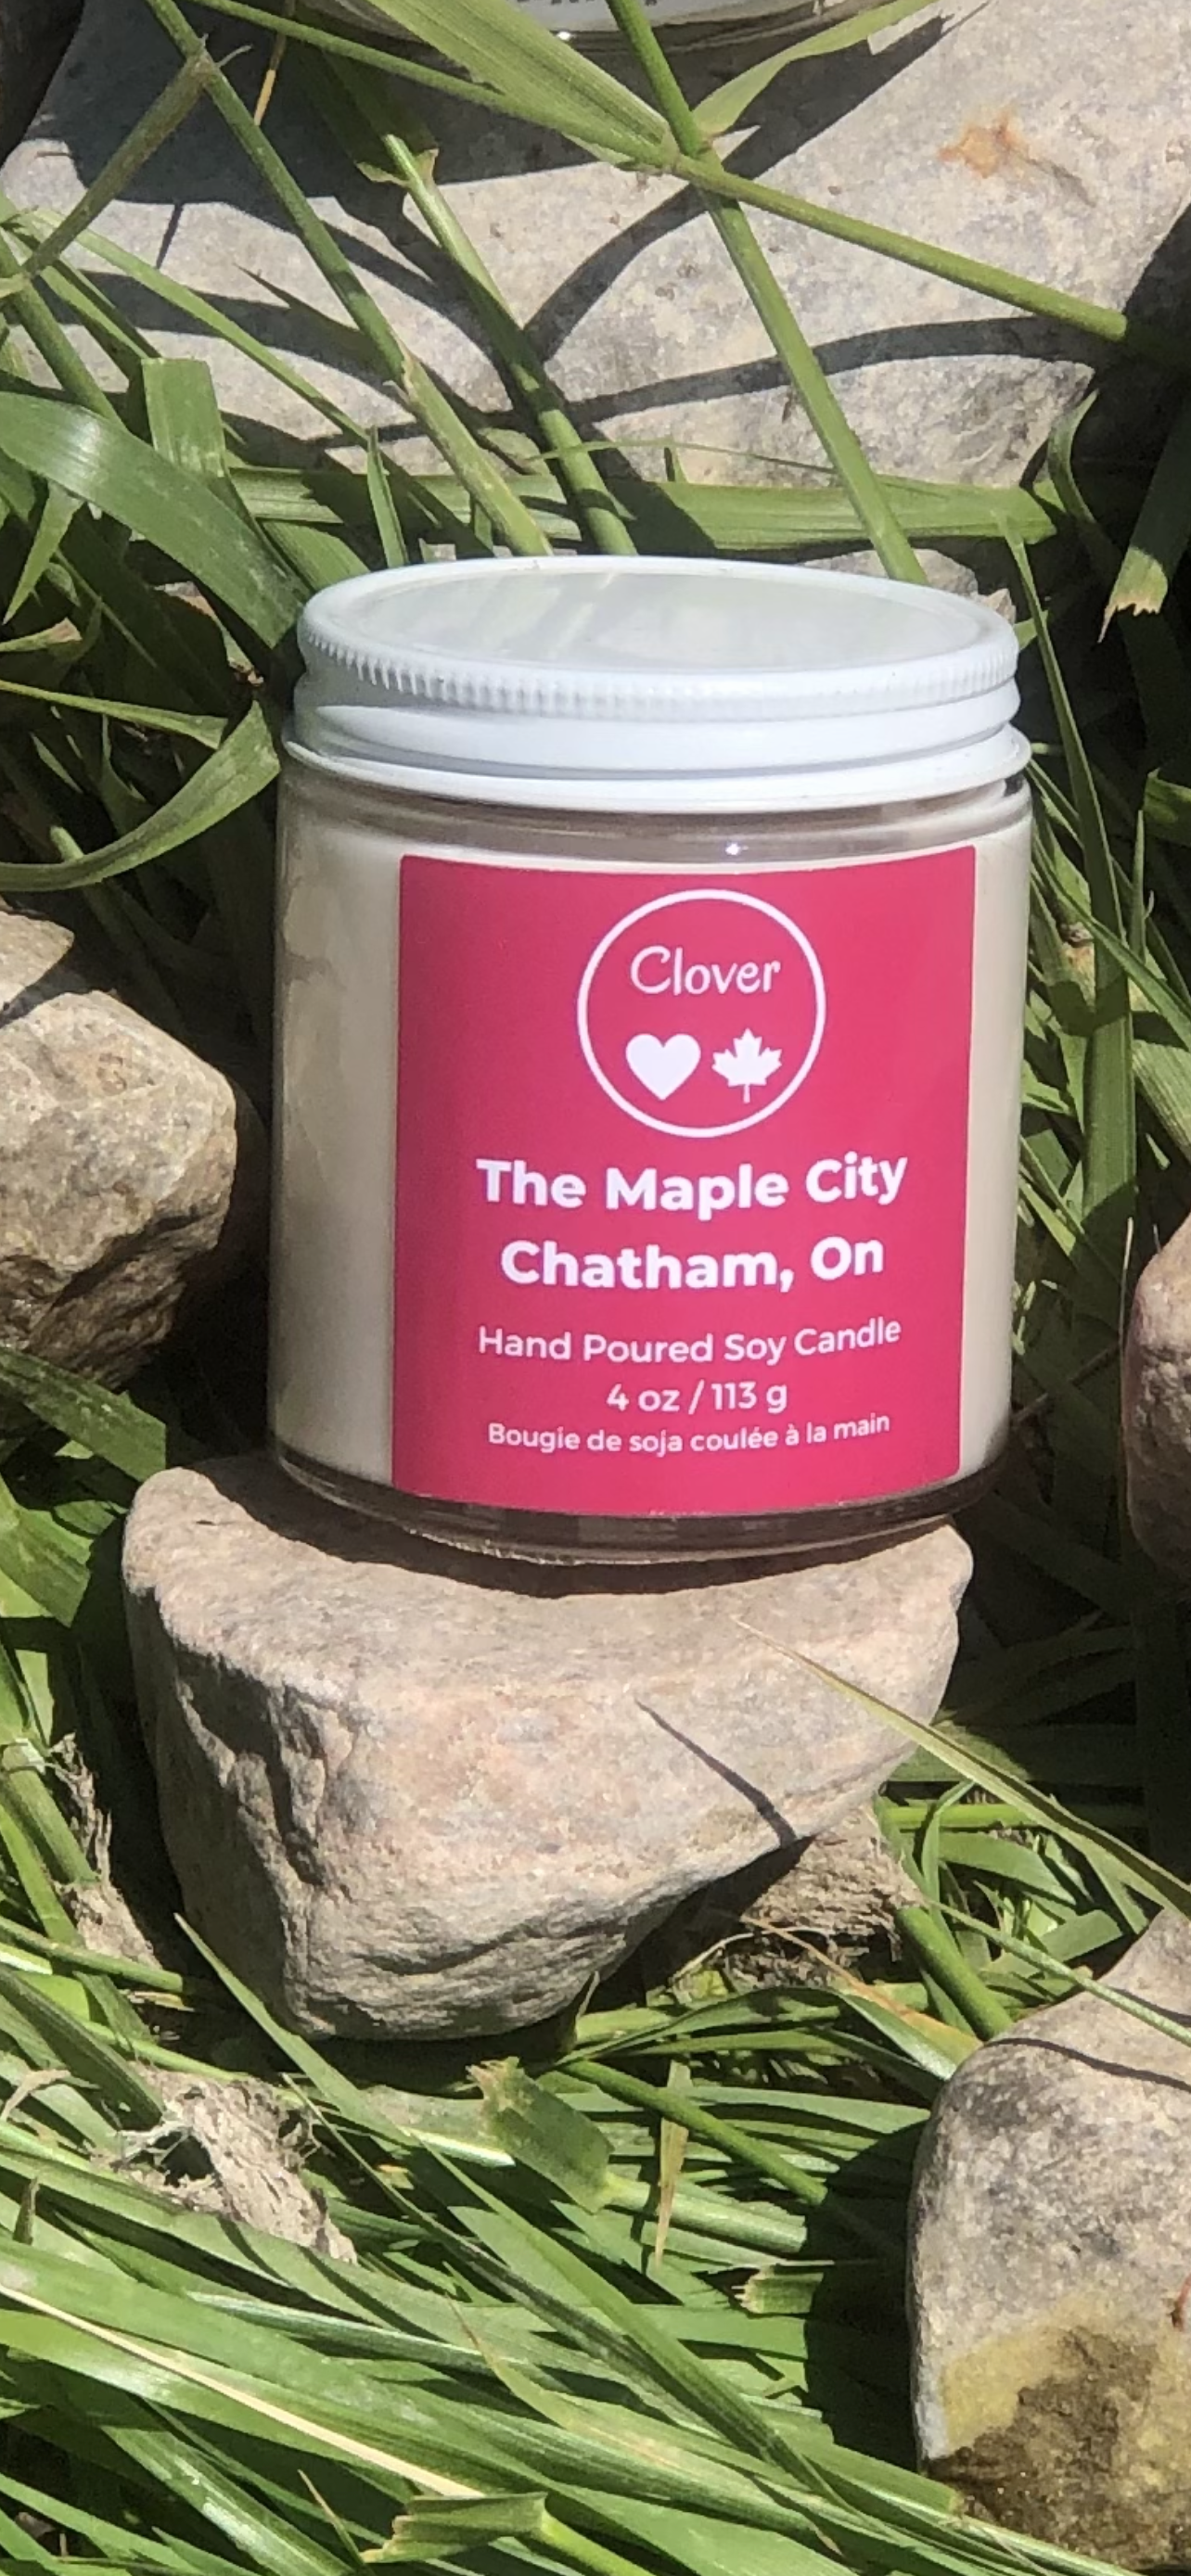 4 oz candle, red label, The Maple City, Chatham ON